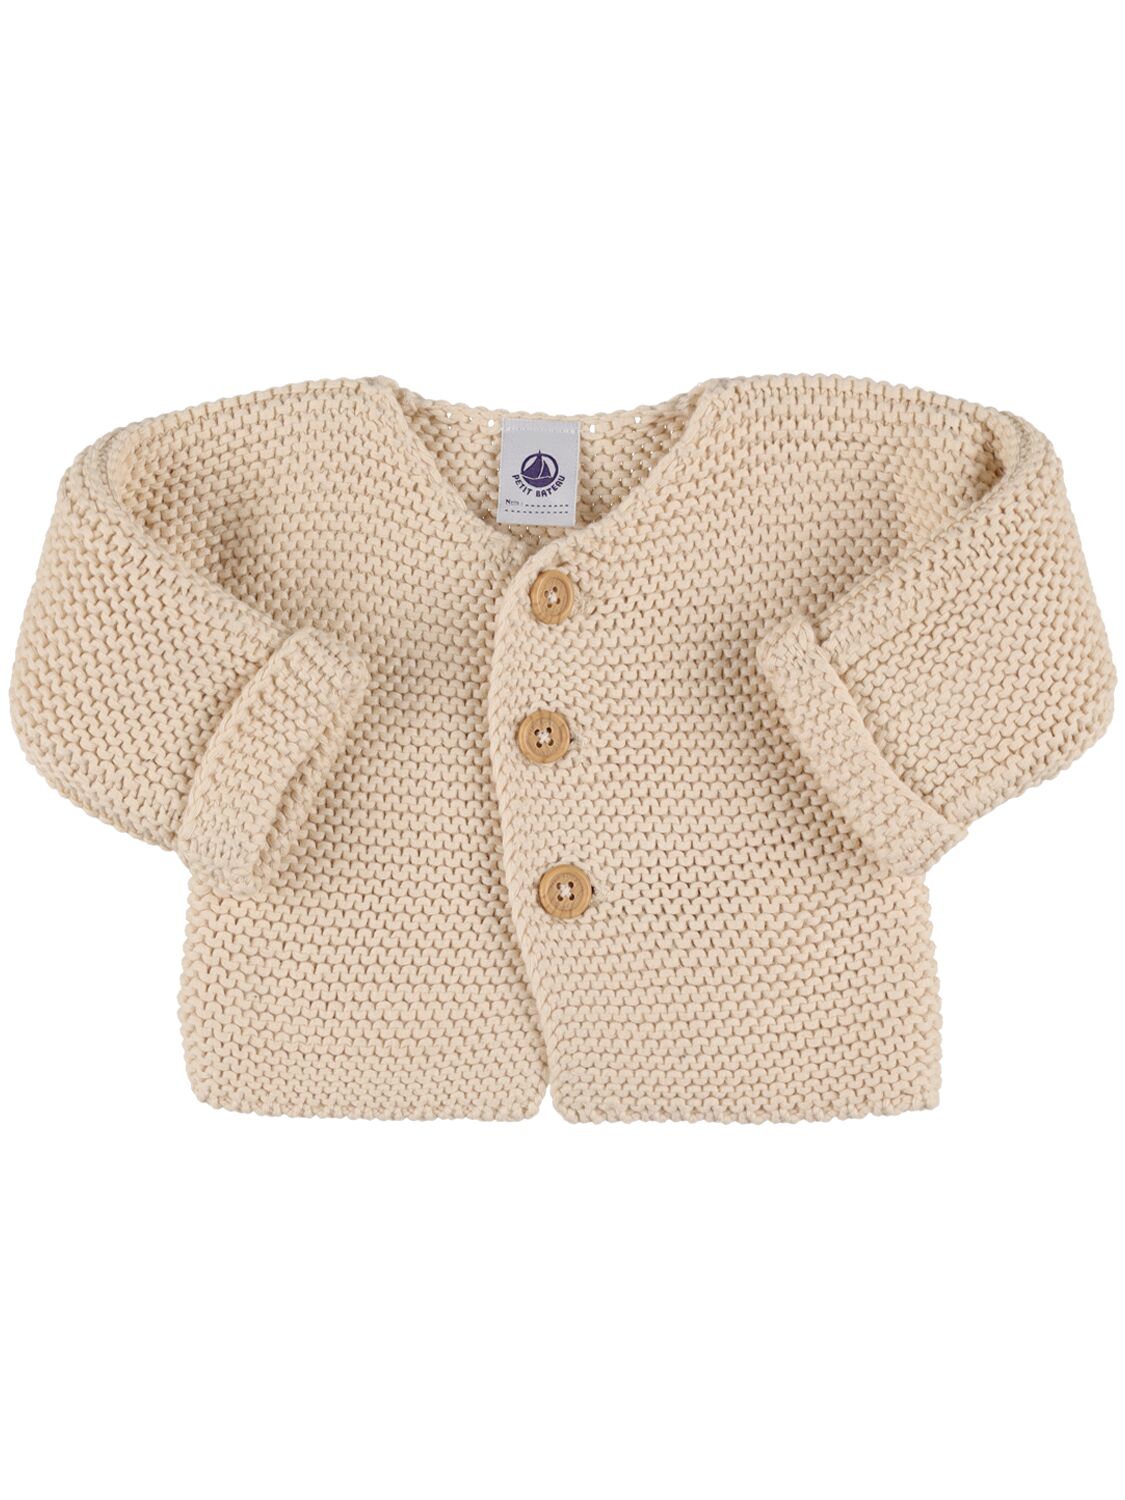 Image of Cotton Tricot Knit Cardigan